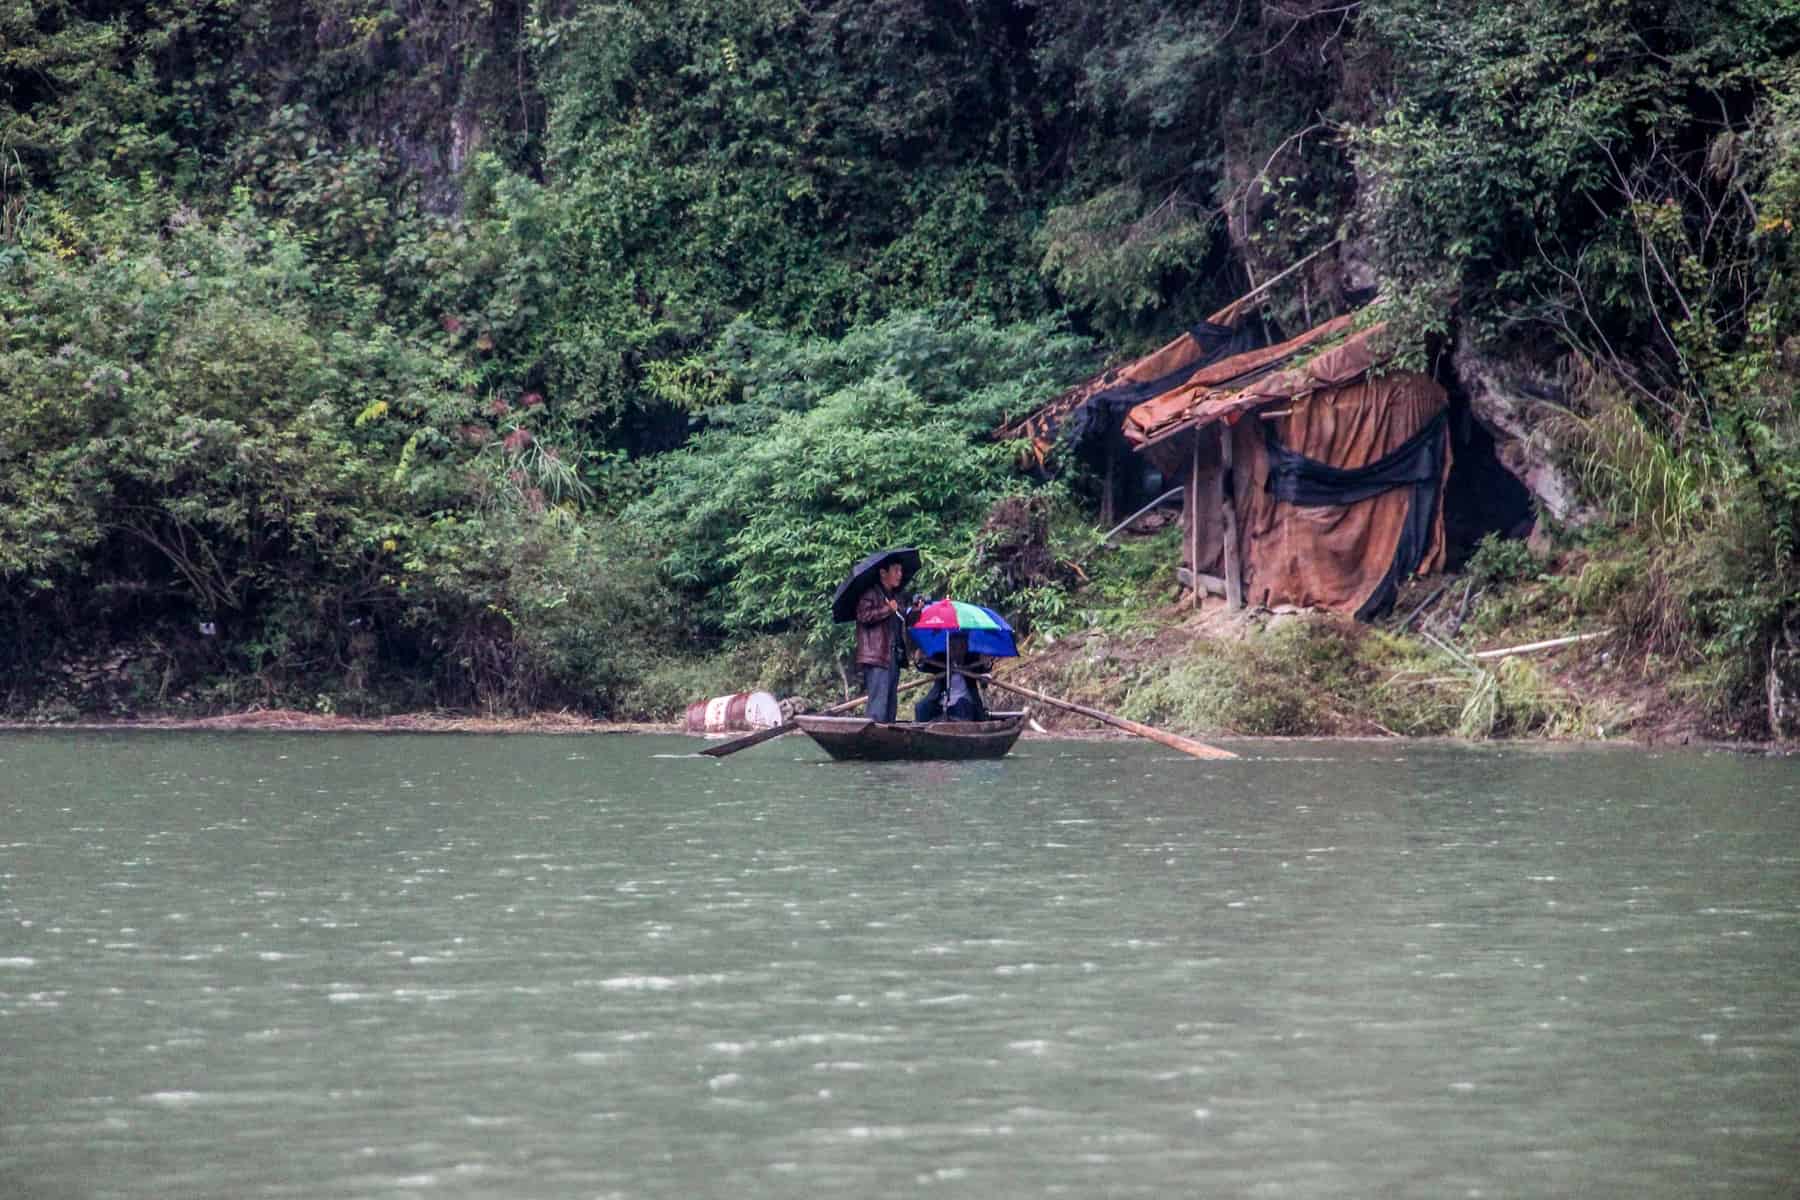 Two Chinese men on a small wooden boat on the Yangtze River holding umbrellas as it rains